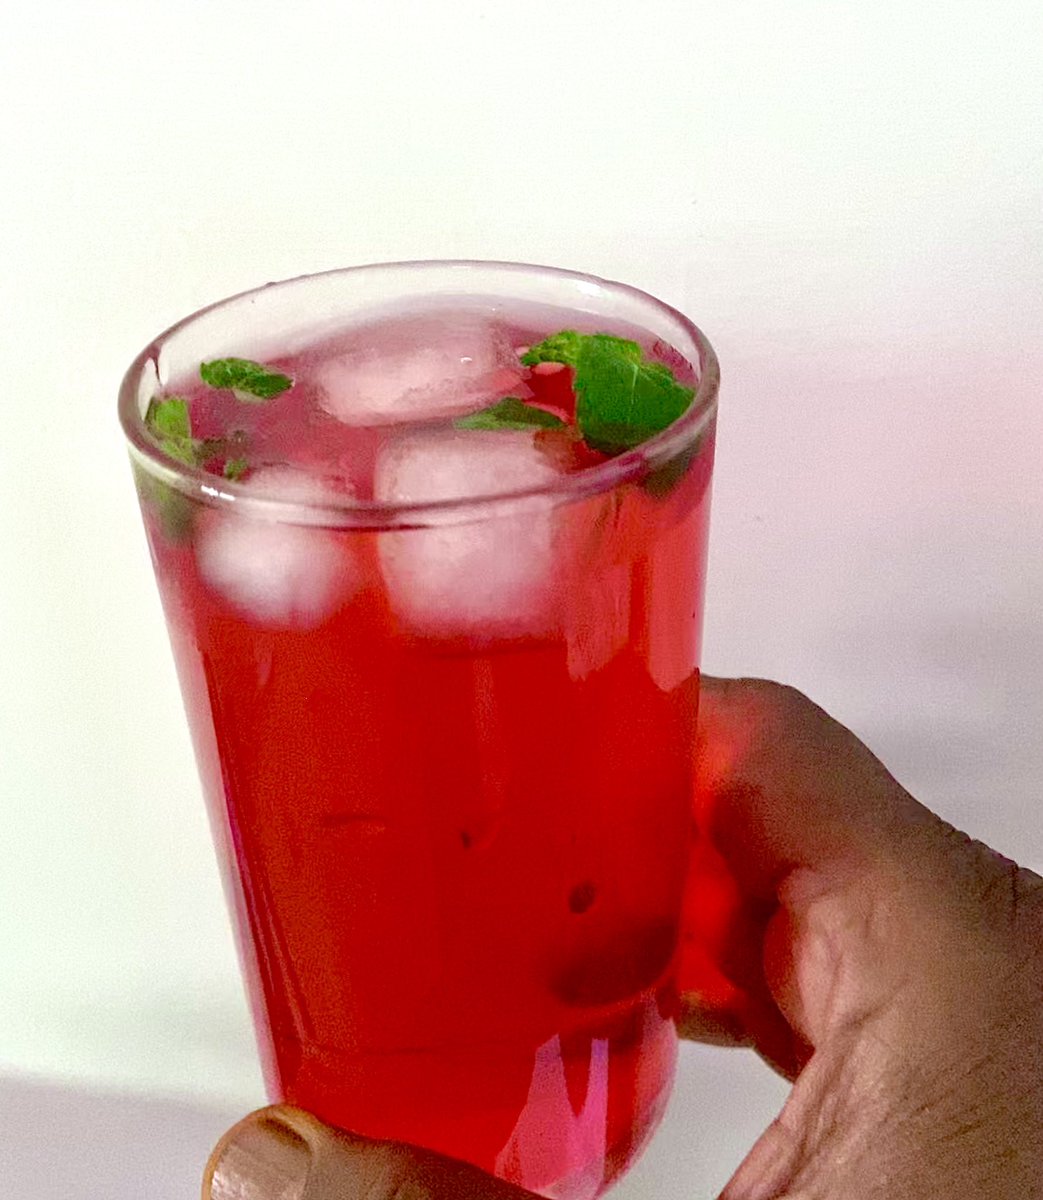 Welcoming the summer with opening of a new bottle #RoohAfza. A glass of chilled RoohAfza Sharbat with a dash of lemon, mint leaves and ice cubes is the best summer drink. Enjoy the drink and beat the heat. @pratibhaprerana @jaya2004khare @suneetamehan @sumitdookia @HamdardFoods